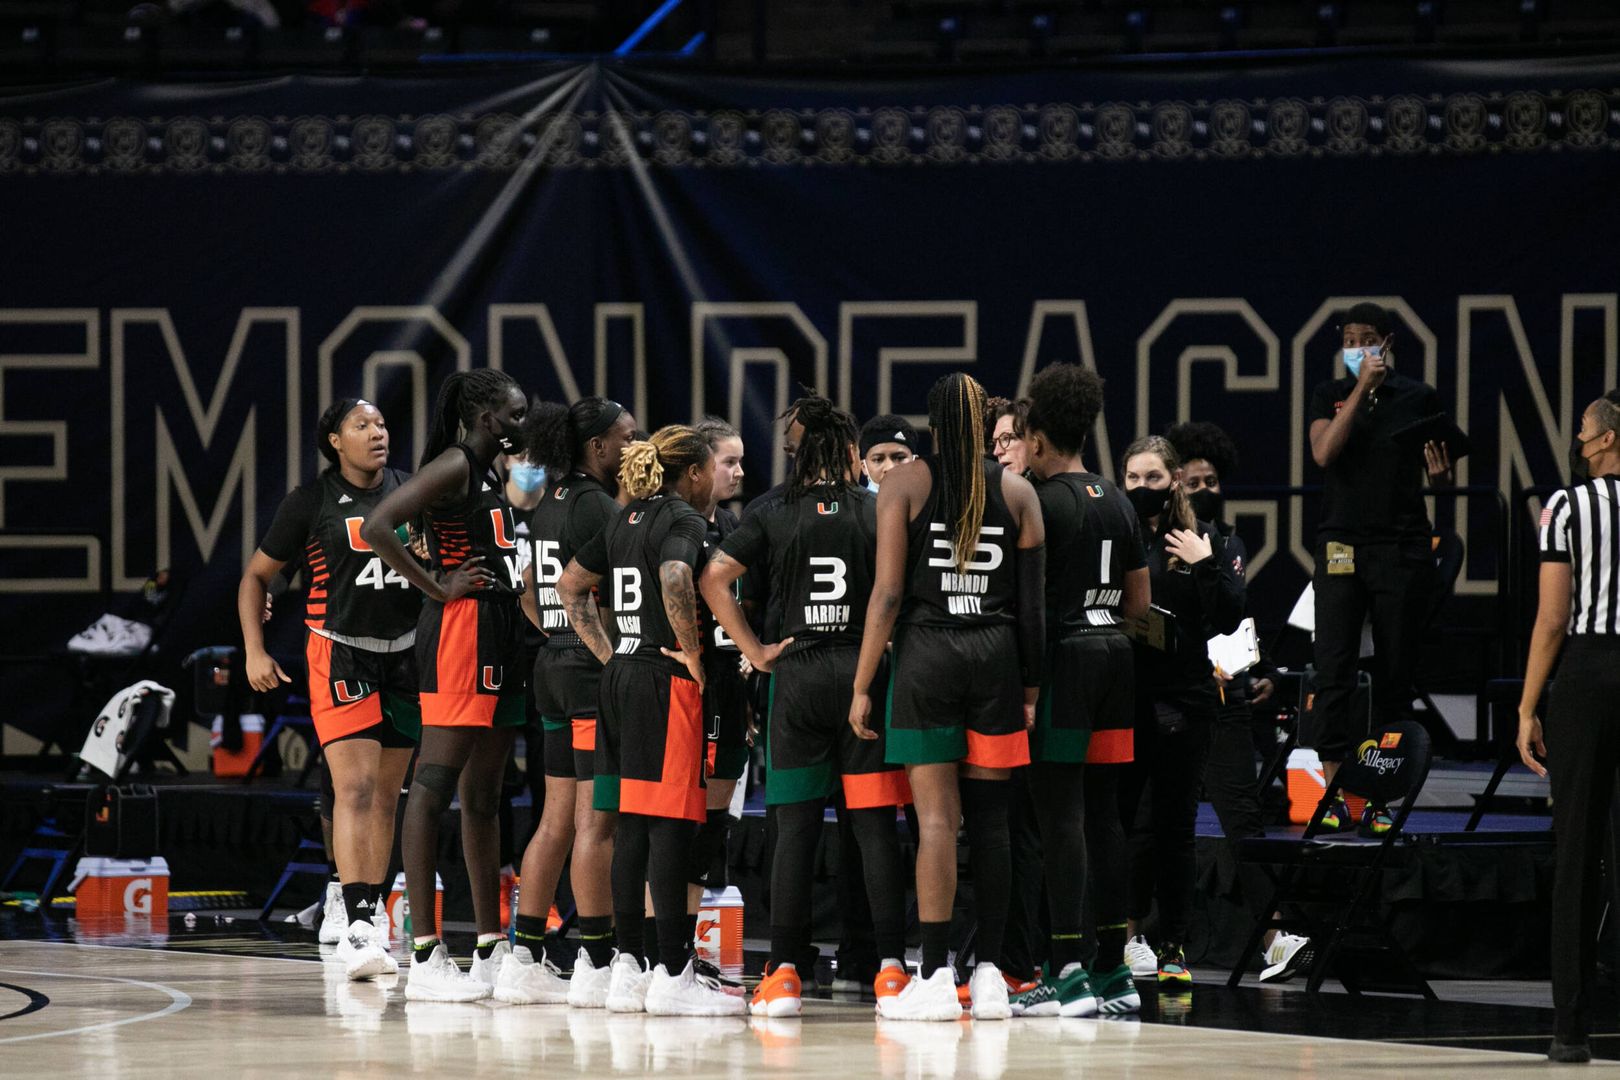 Consistency Key For Canes